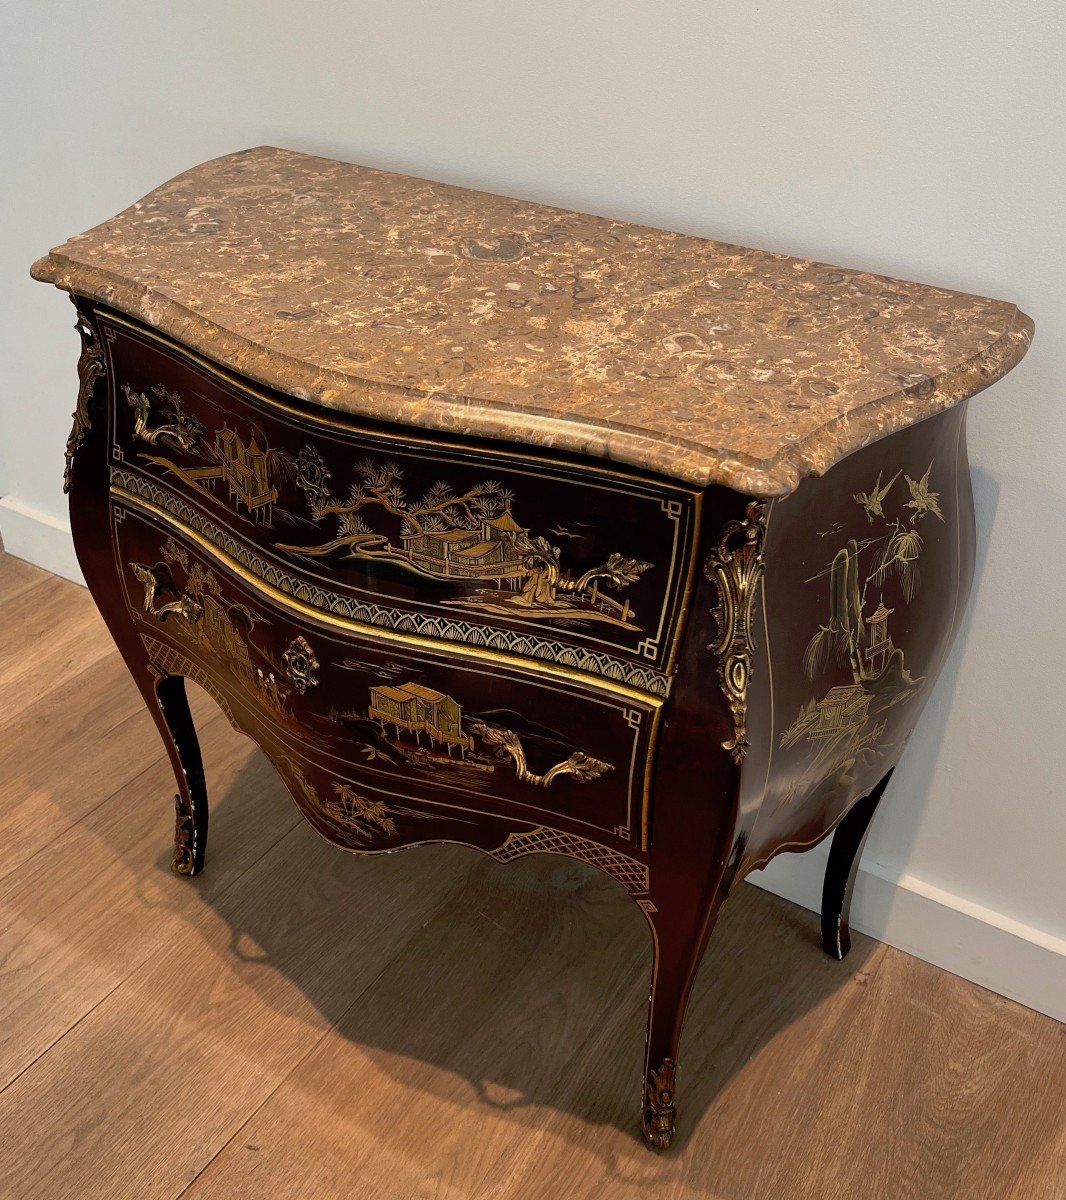 Small Lacquered Commode With Chinese Scenes And Bronze Handles And Feet. French Work In The Sty-photo-7